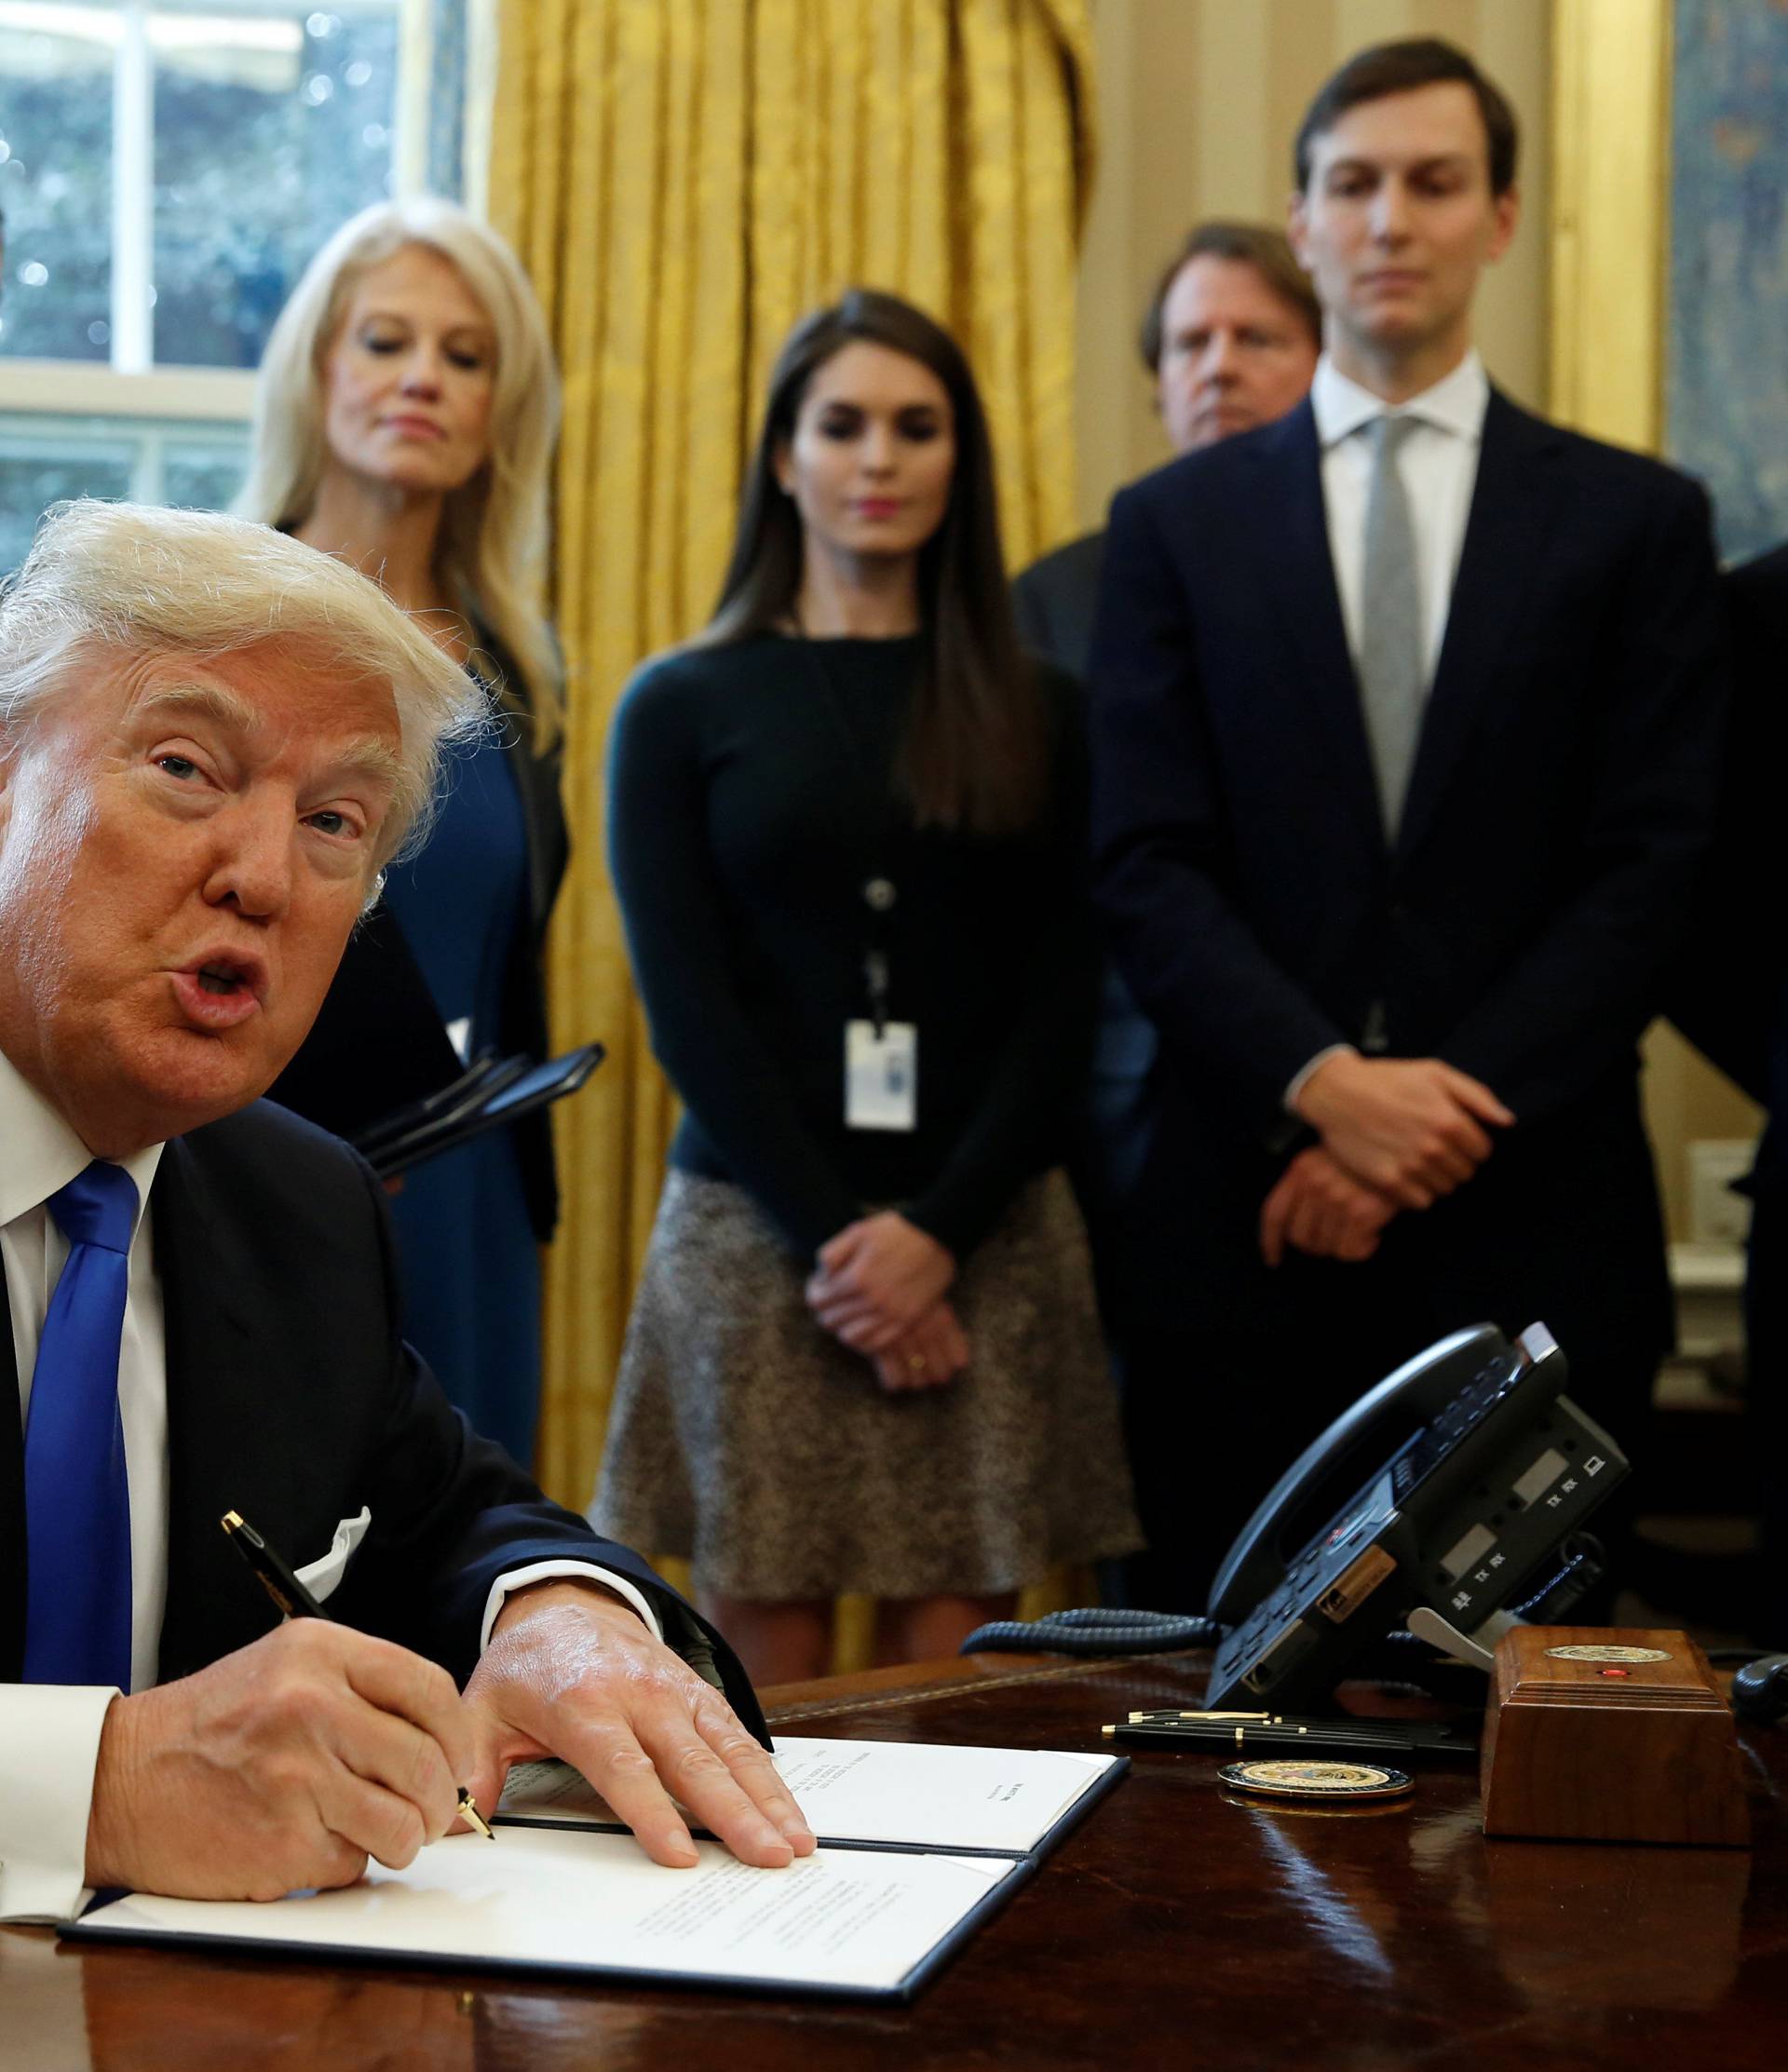 President Trump signs executive orders at the White House in Washington